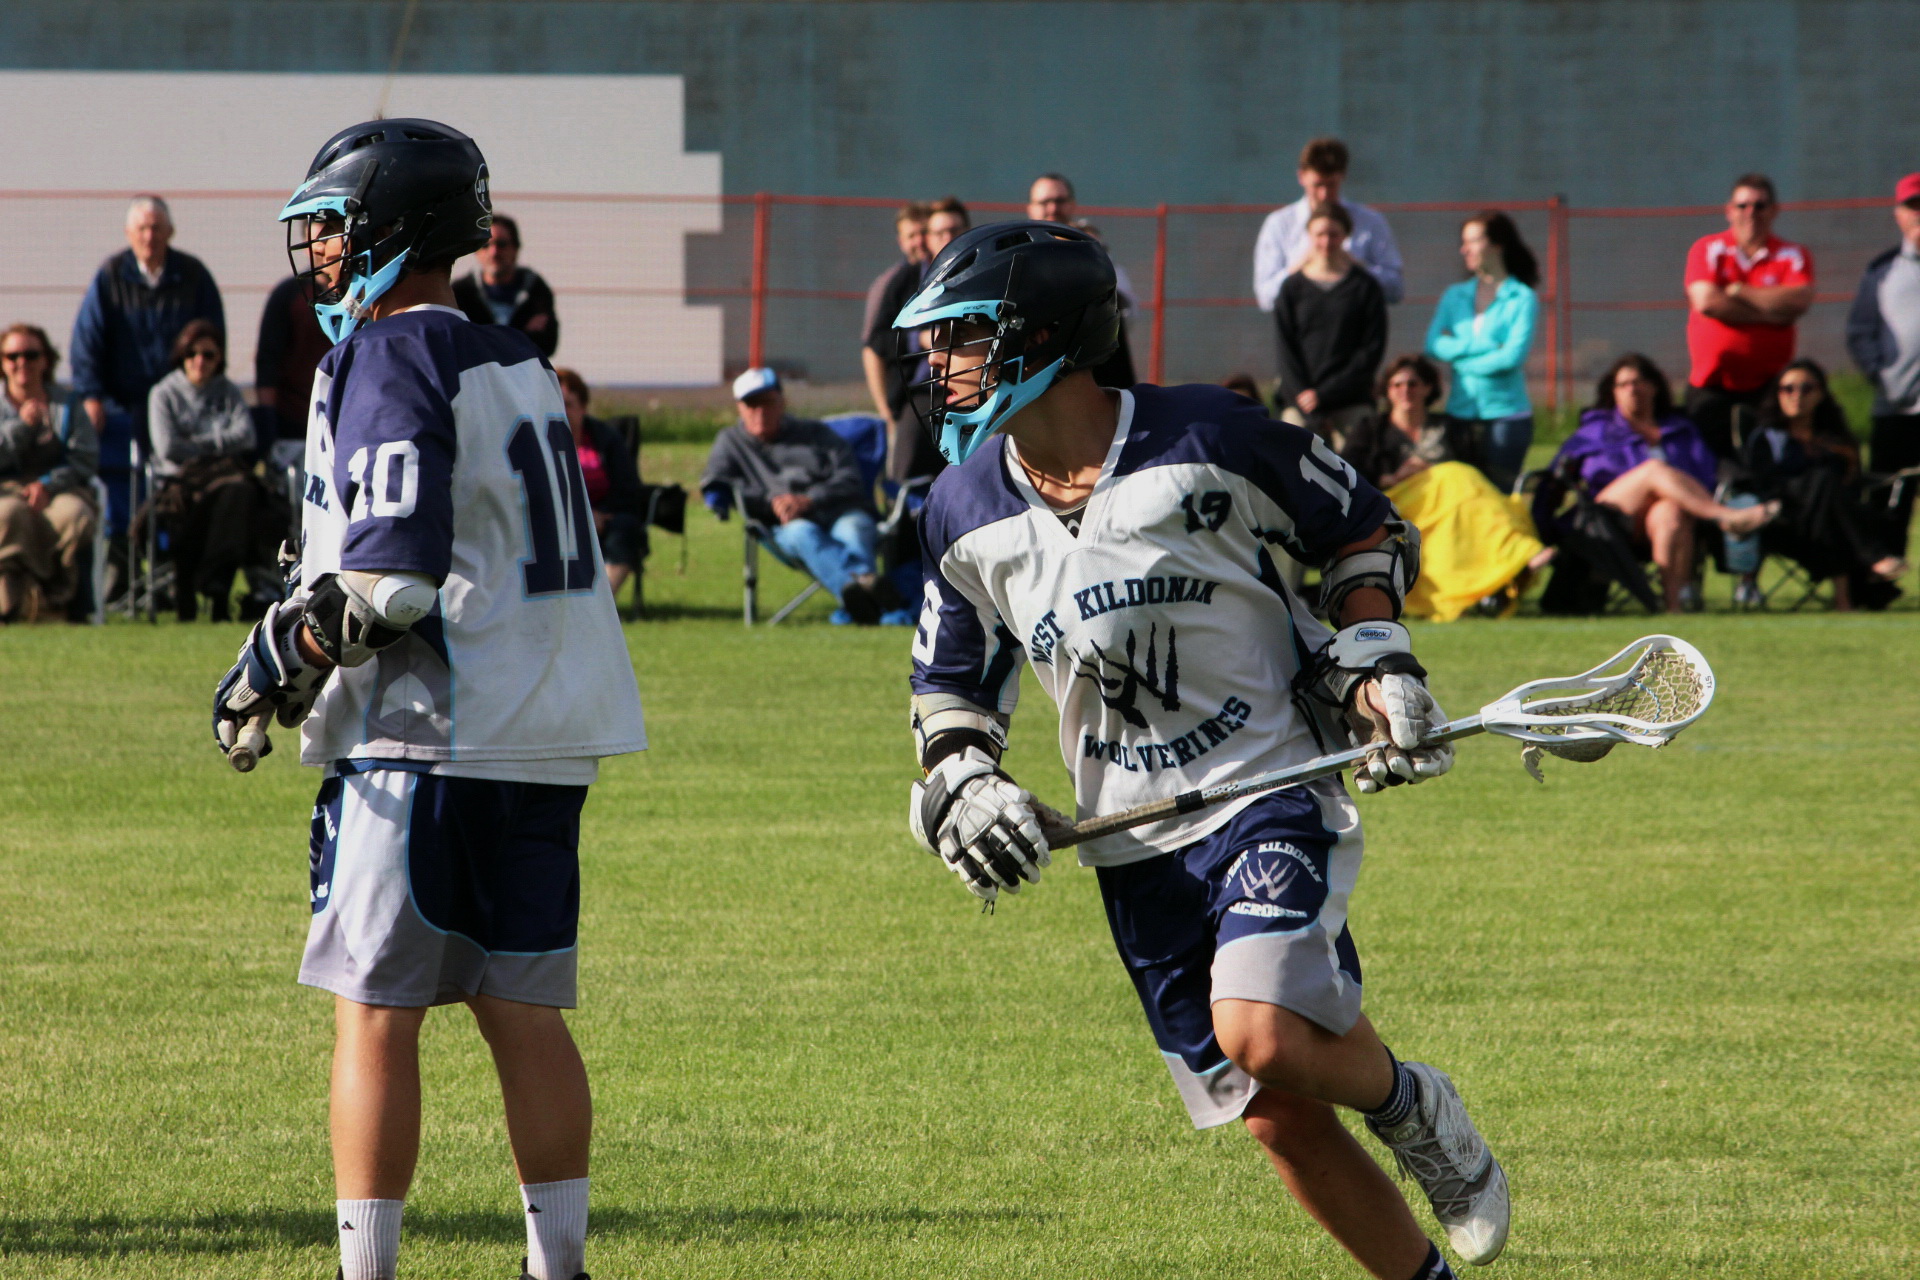 two boys are playing lacrosse on the field with people in the background